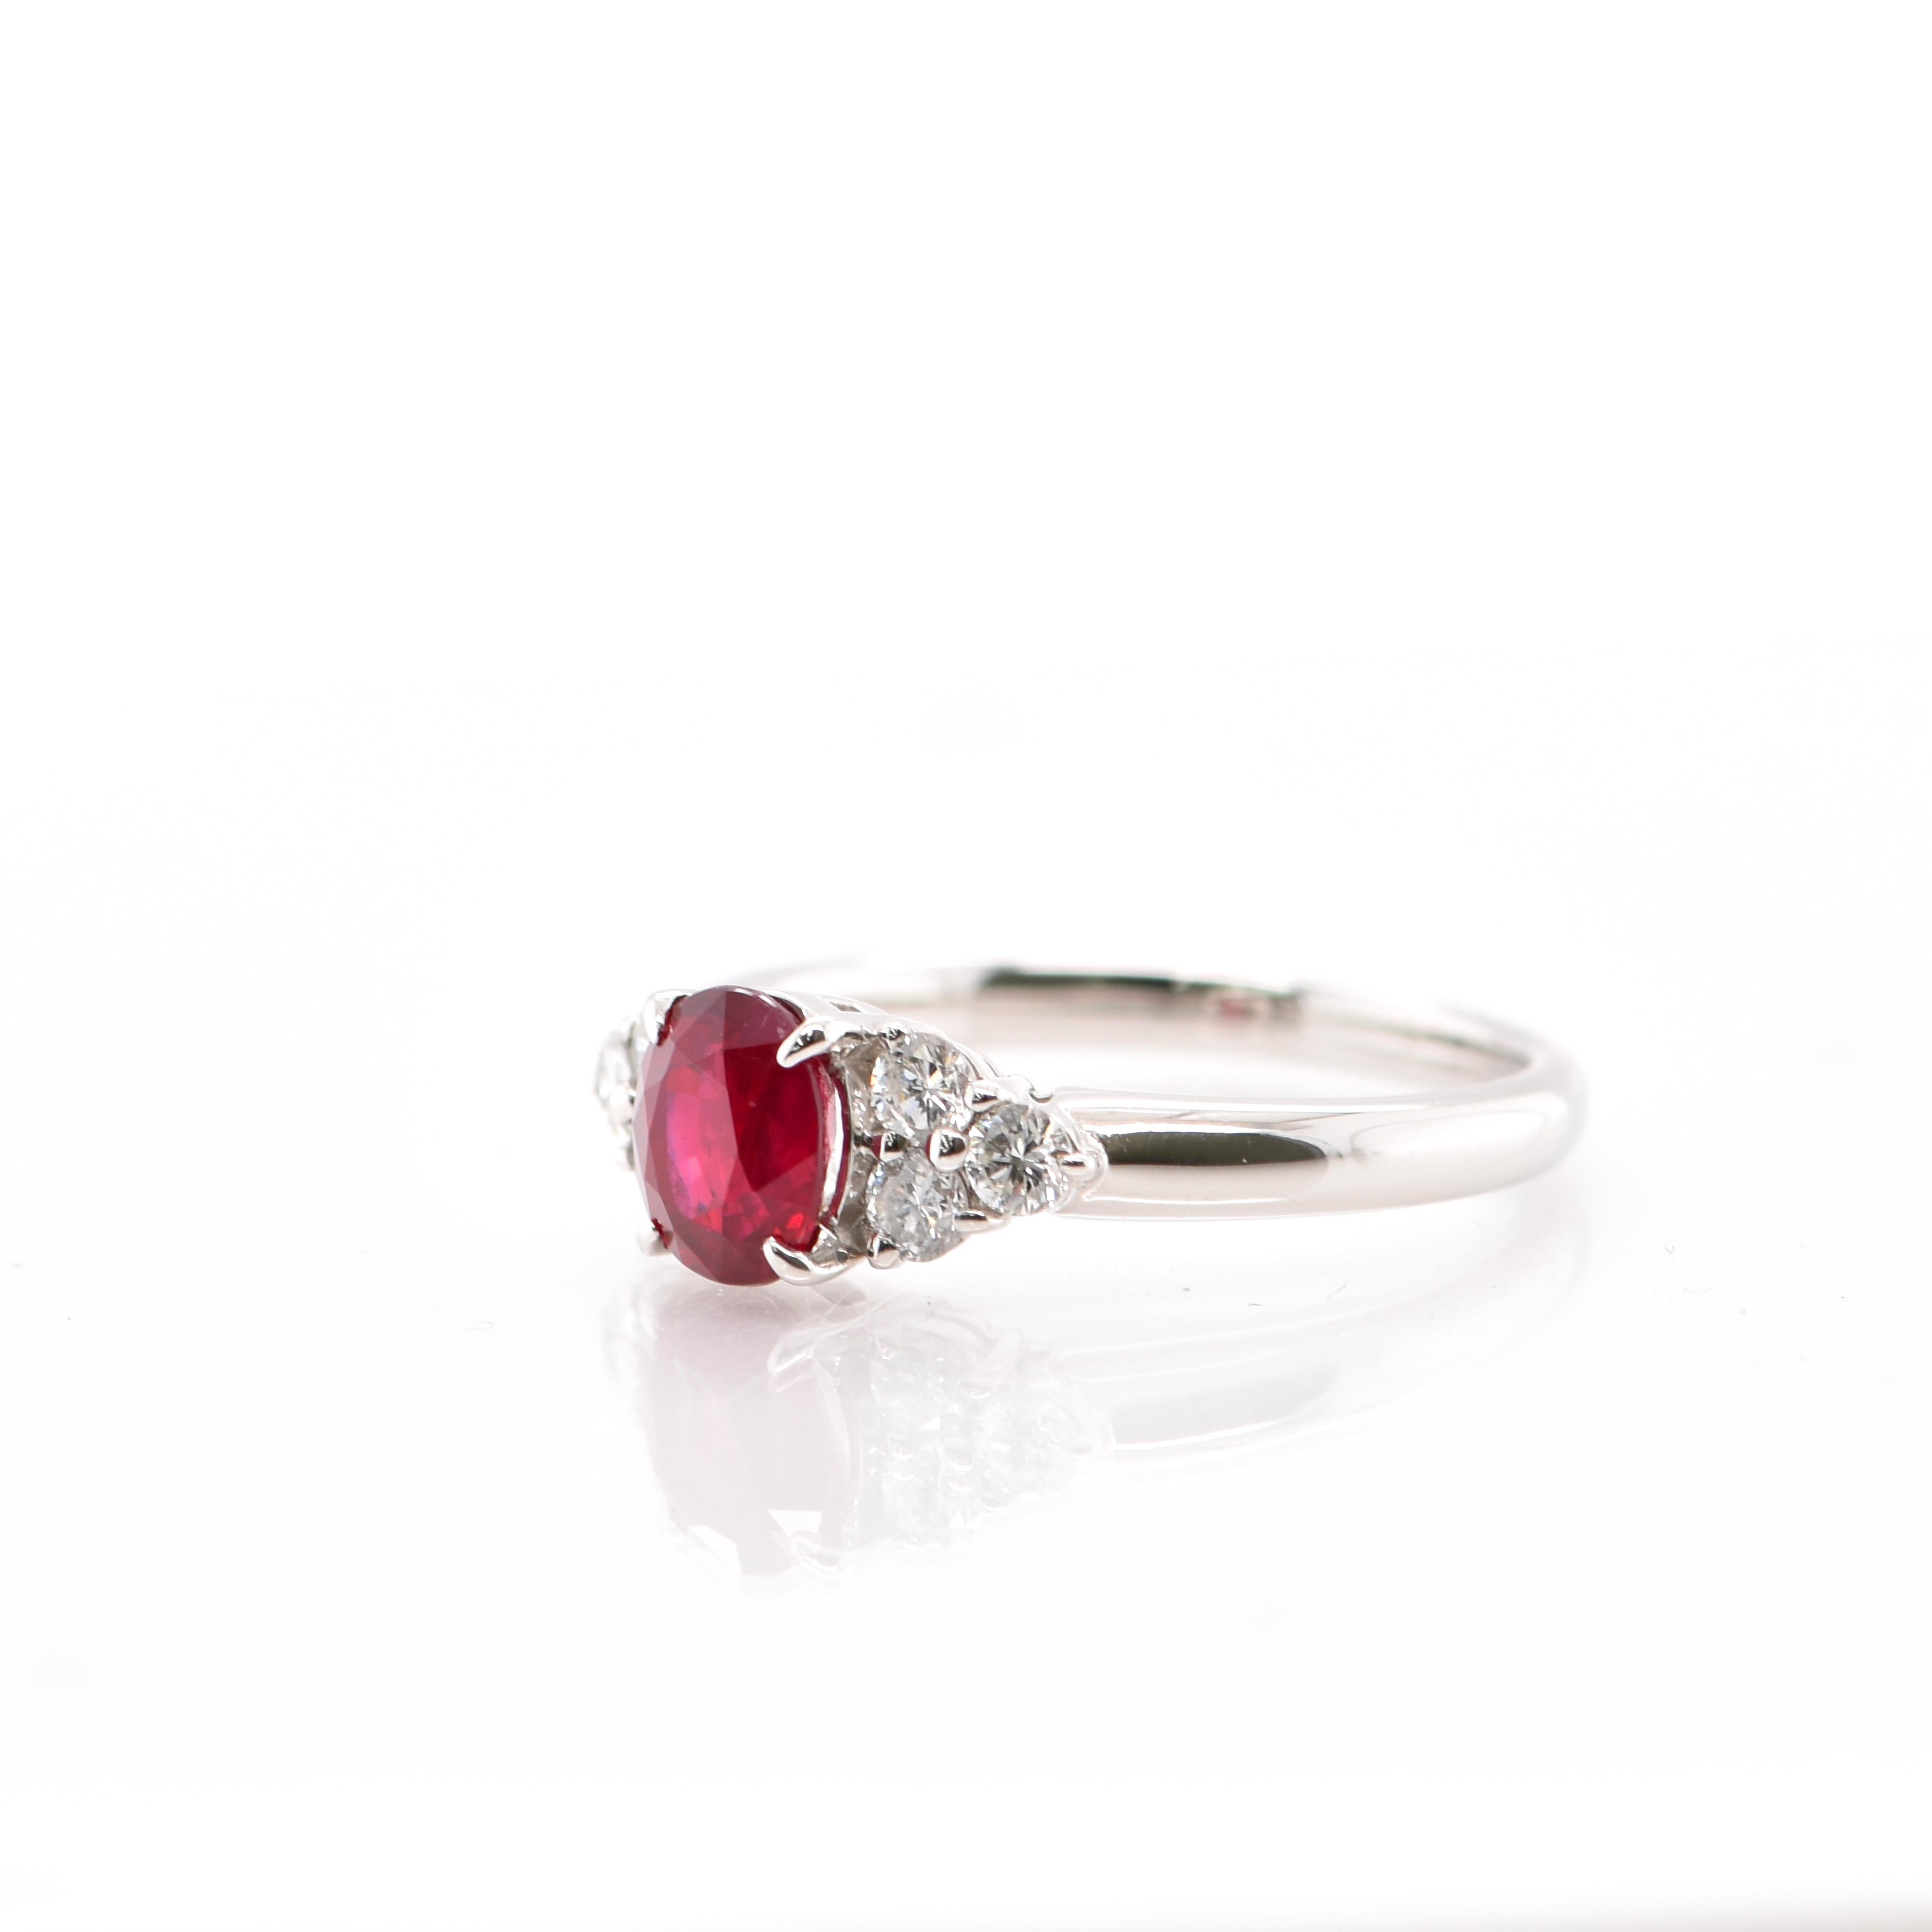 Oval Cut 1.45 Carat Pigeon's Blood Burmese Ruby and Diamond Ring Set in Platinum